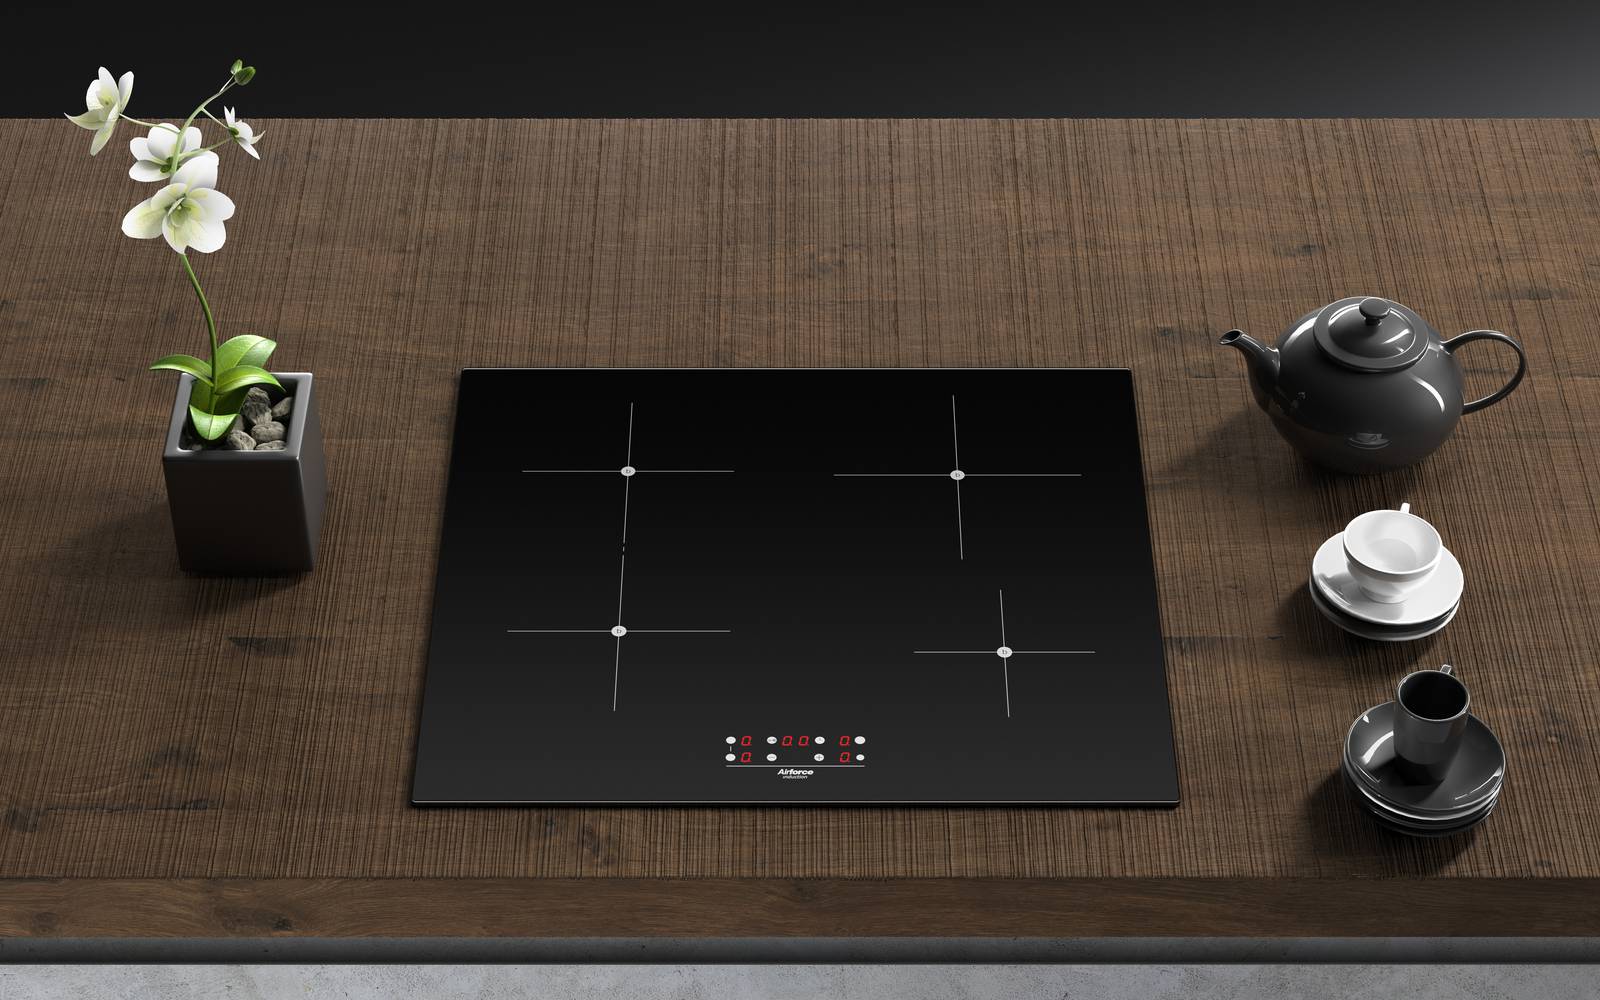 Airforce Integra 60-4 B 59cm Induction Hob with Integra ready System and touch controls